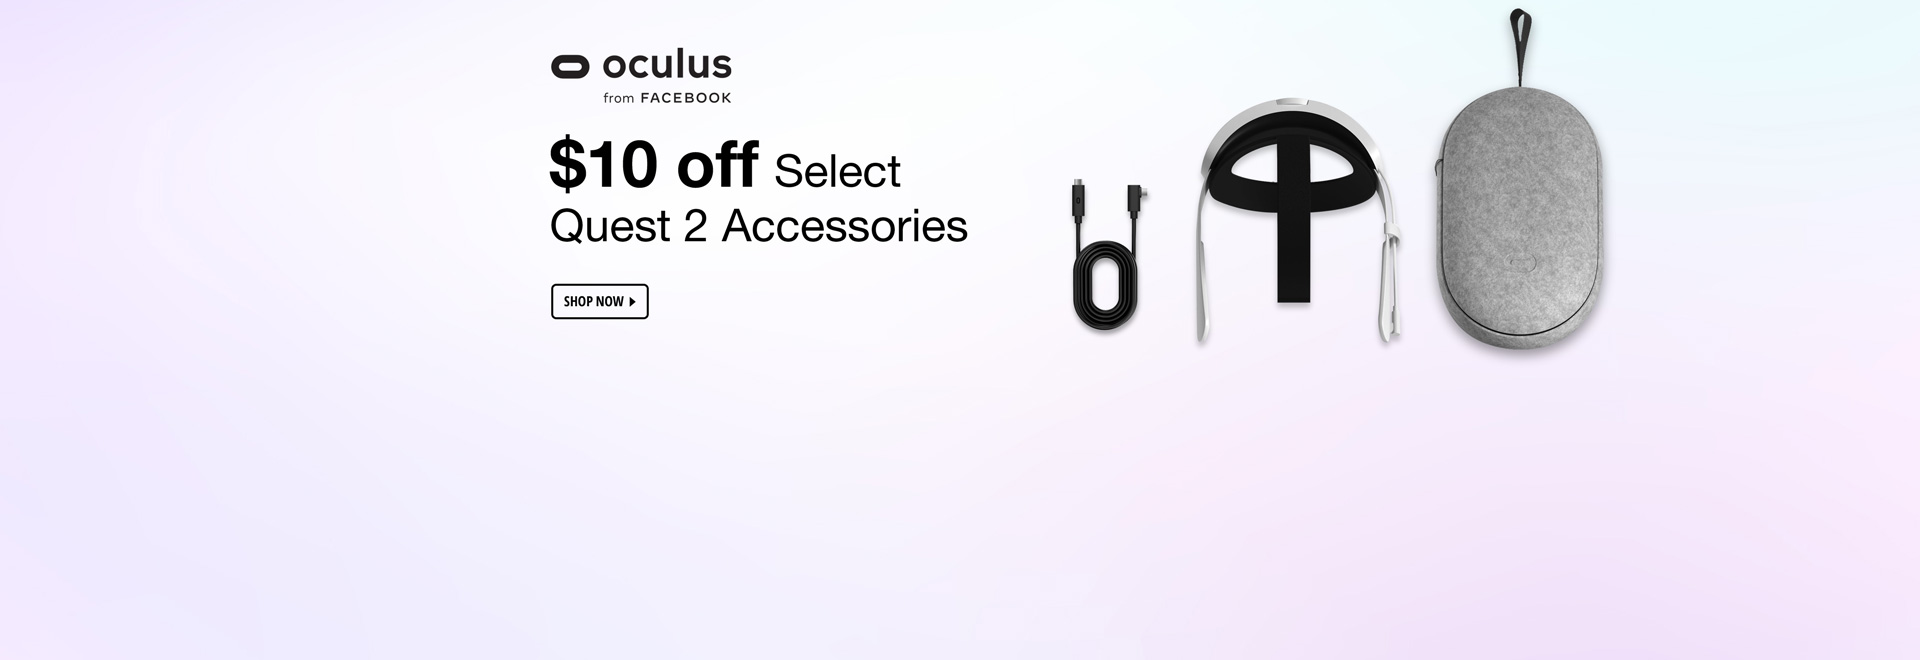 $10 off Select Quest 2 Accessories